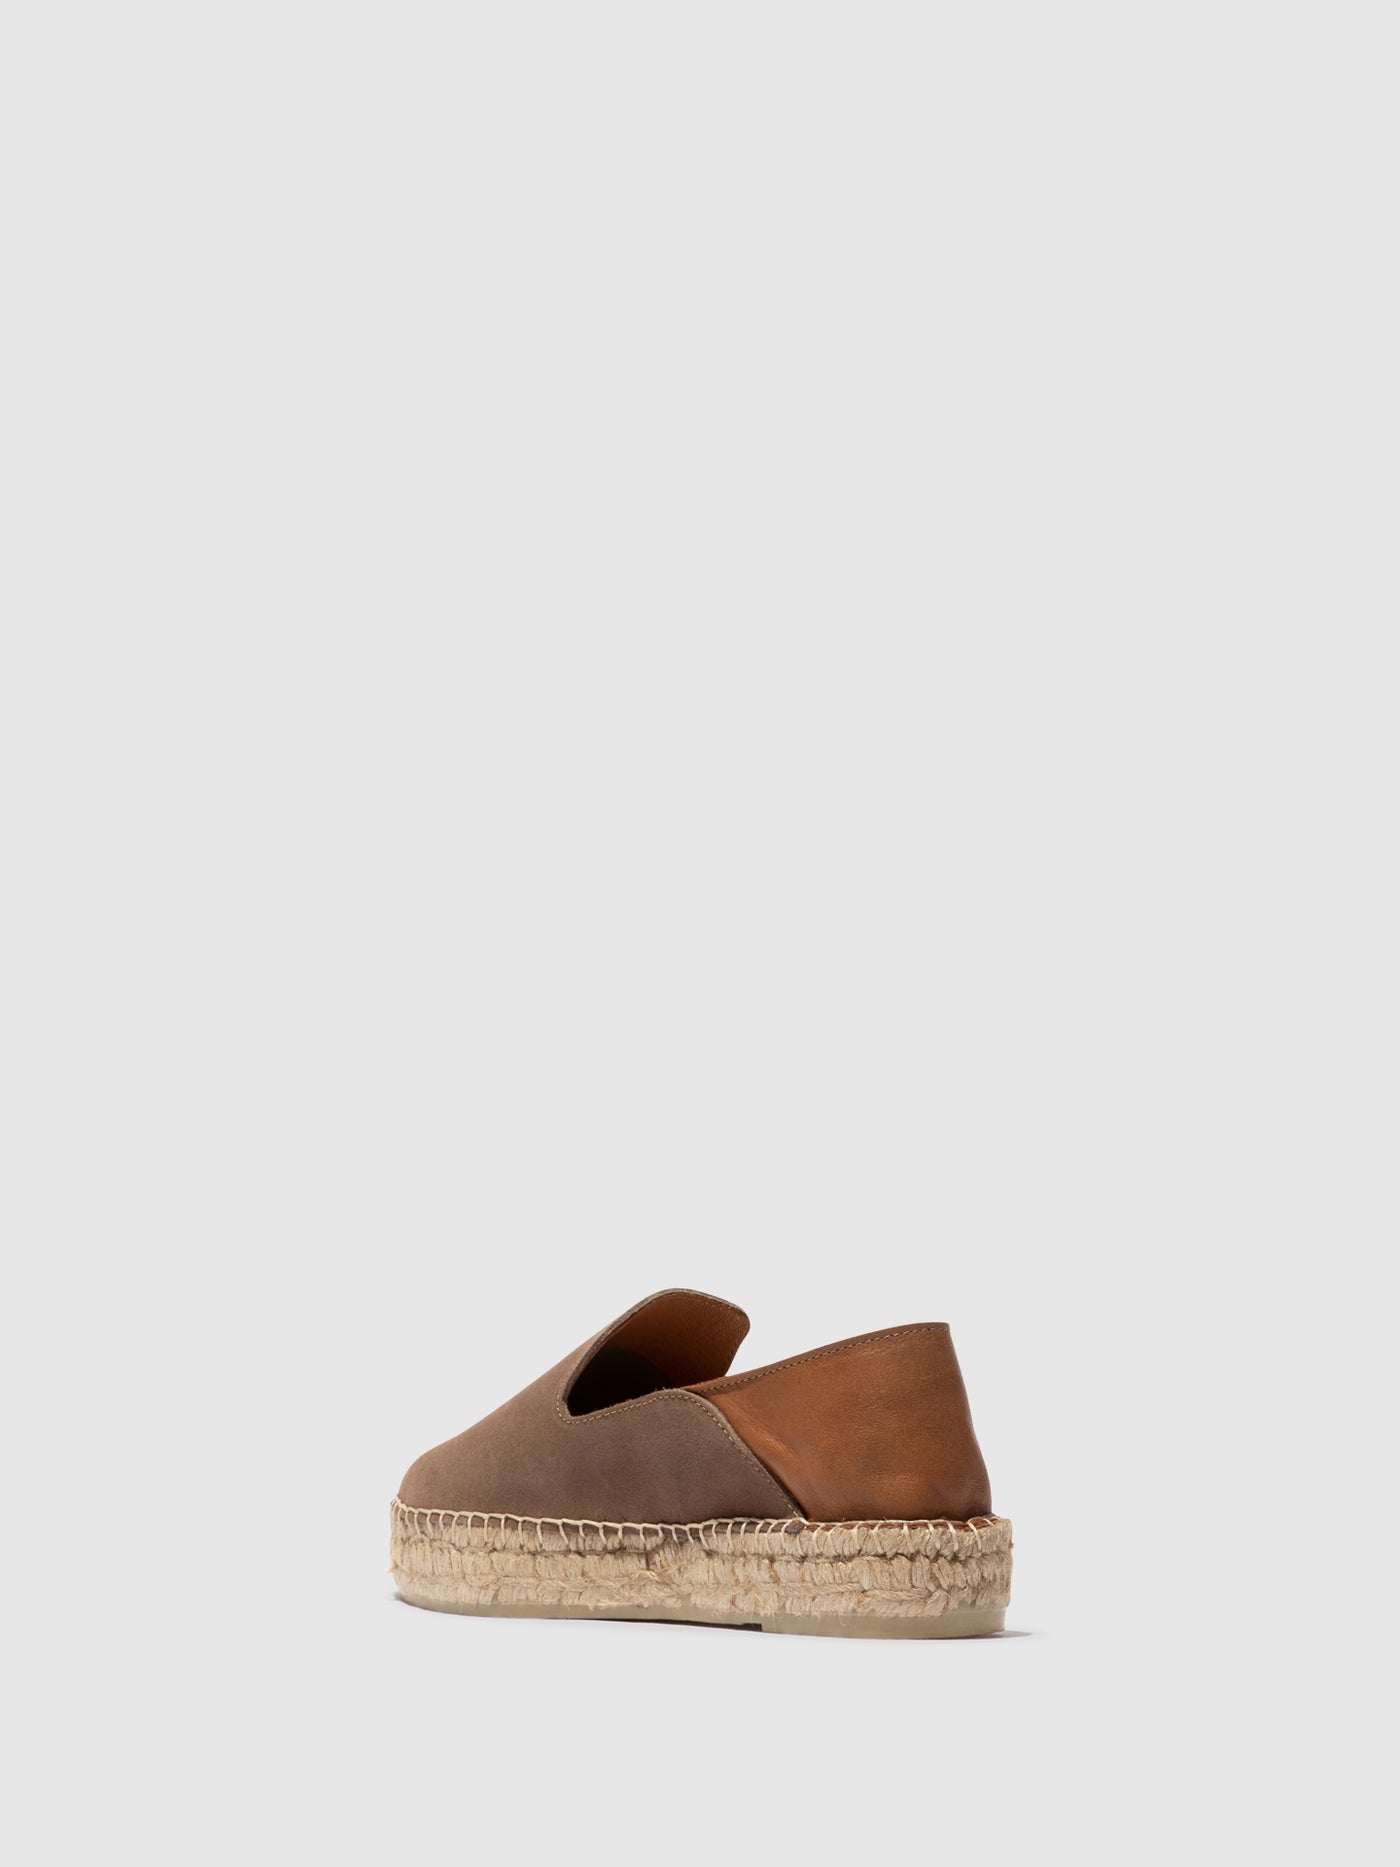 Slip-on Espadrilles PULY522FLY TAUPE/TAN